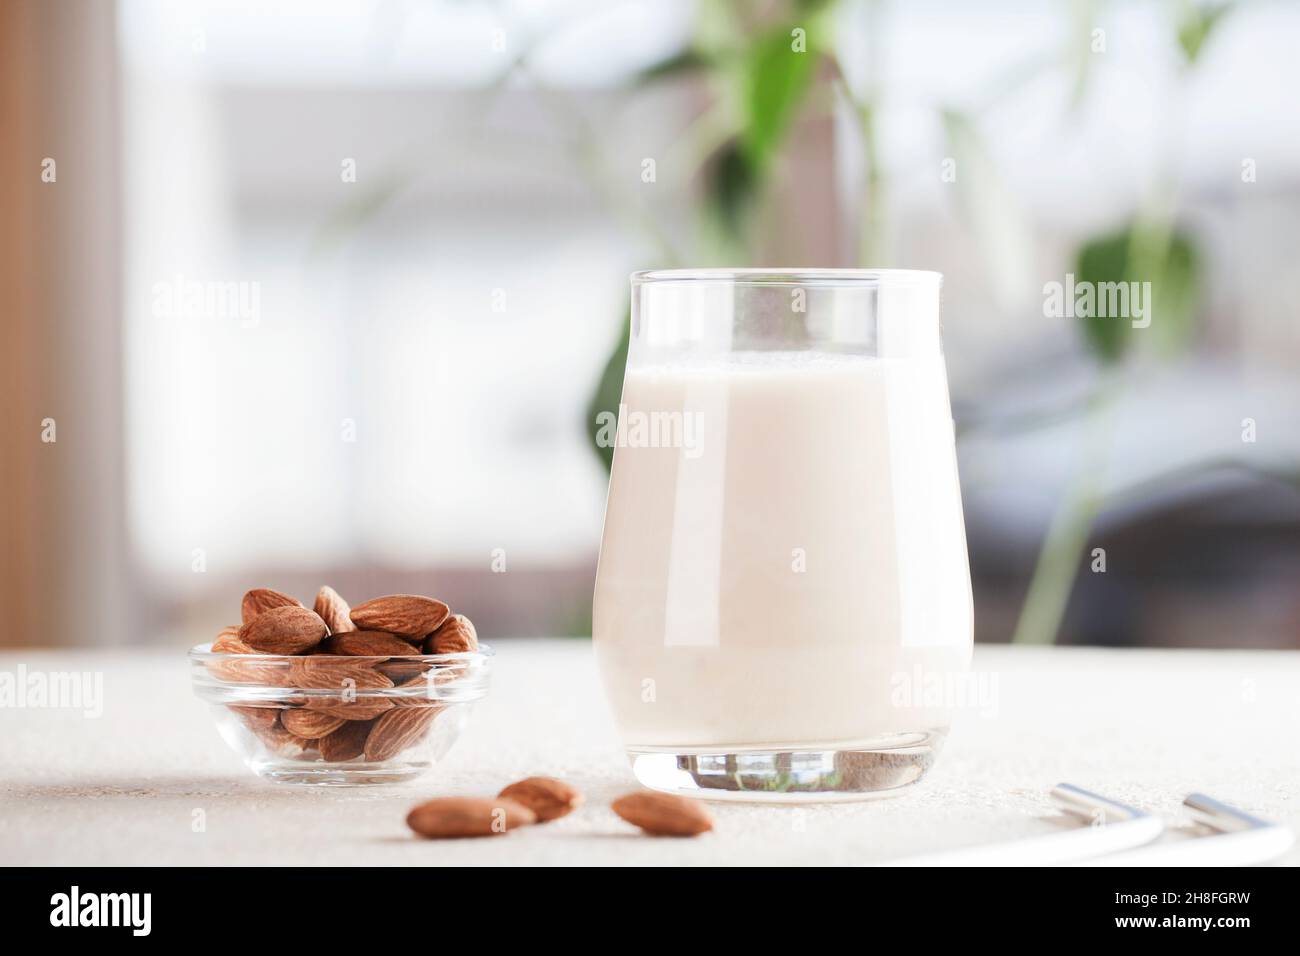 Vegan almond milk in glass with nuts on blurry background. Copy space. Healthy vegetarian food. selective focus. Non dairy alternative milk Stock Photo